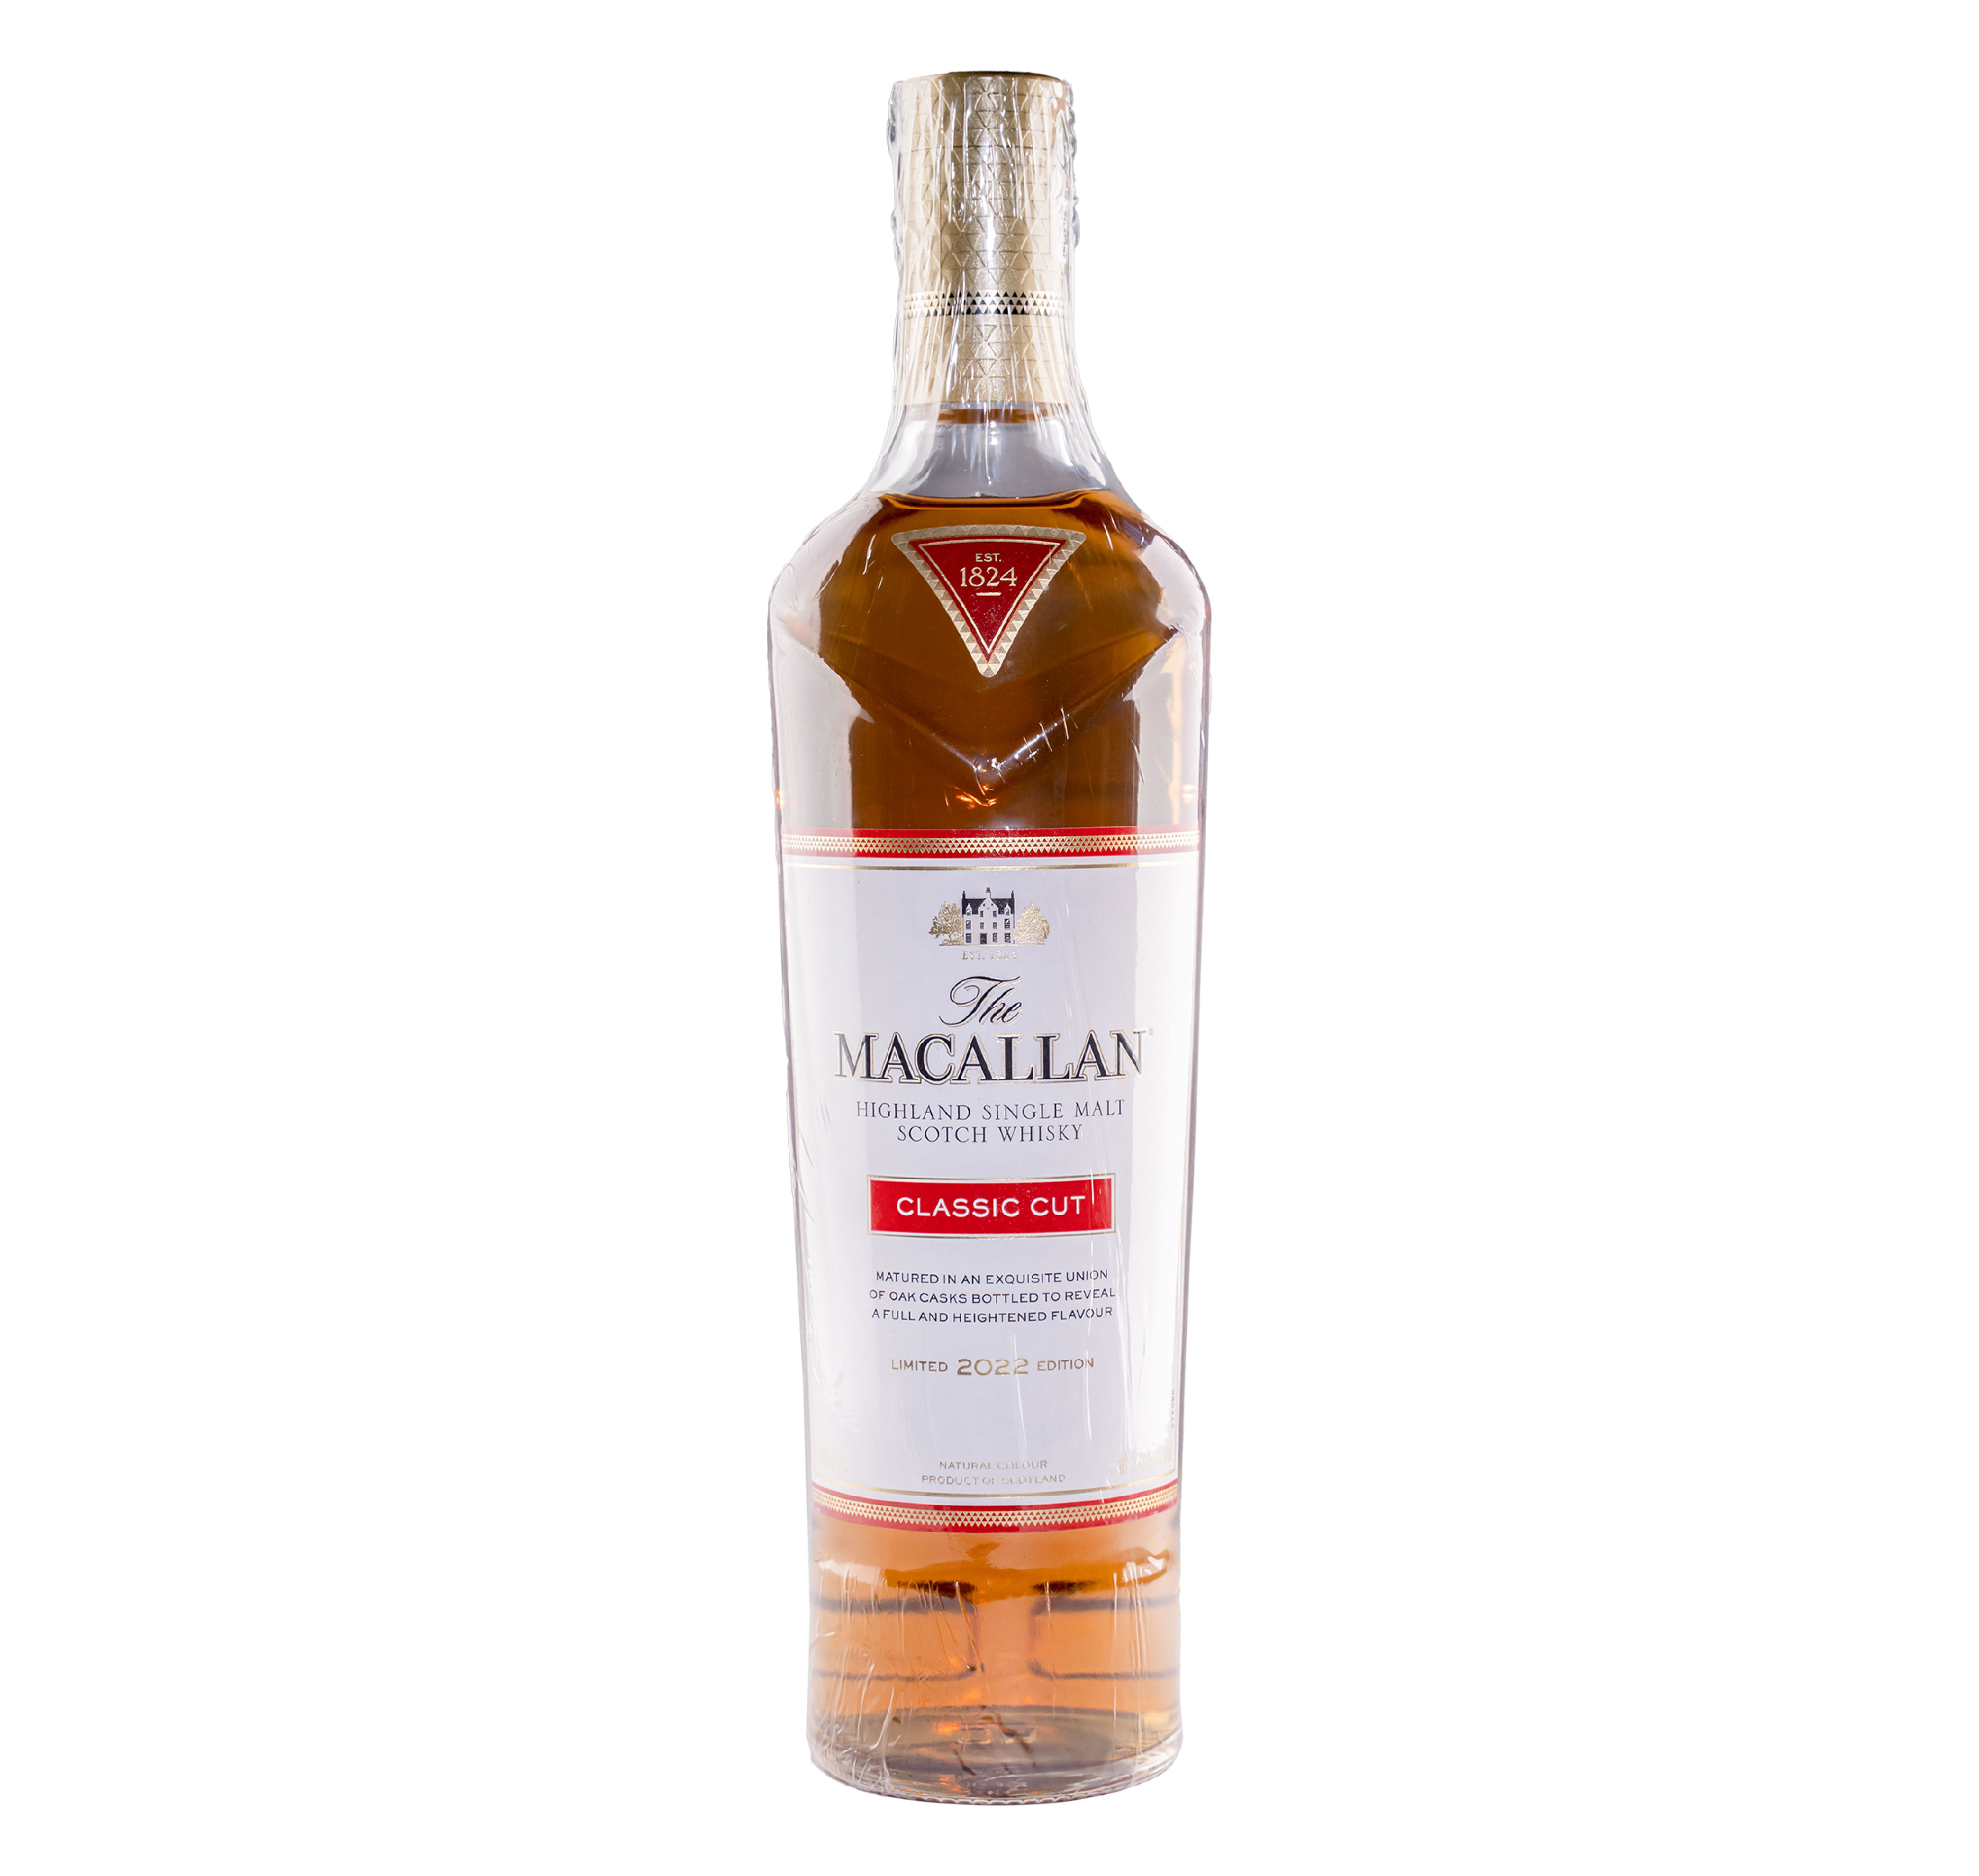 The Macallan Classic Cut, Limited 2022 Edition